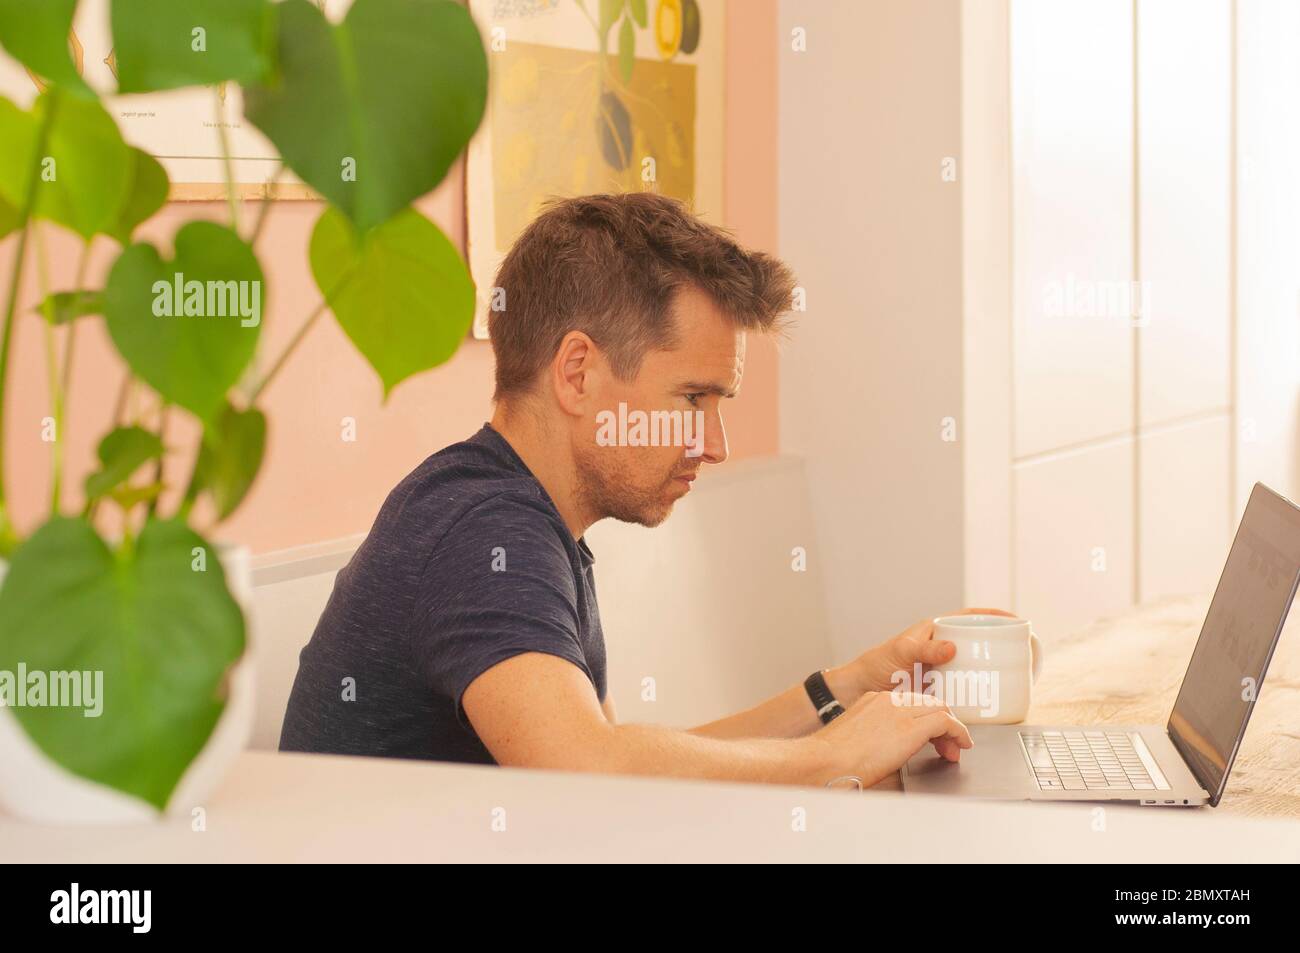 Portrait of man working from home on laptop computer during coronavirus lockdown. Landscape format. Stock Photo